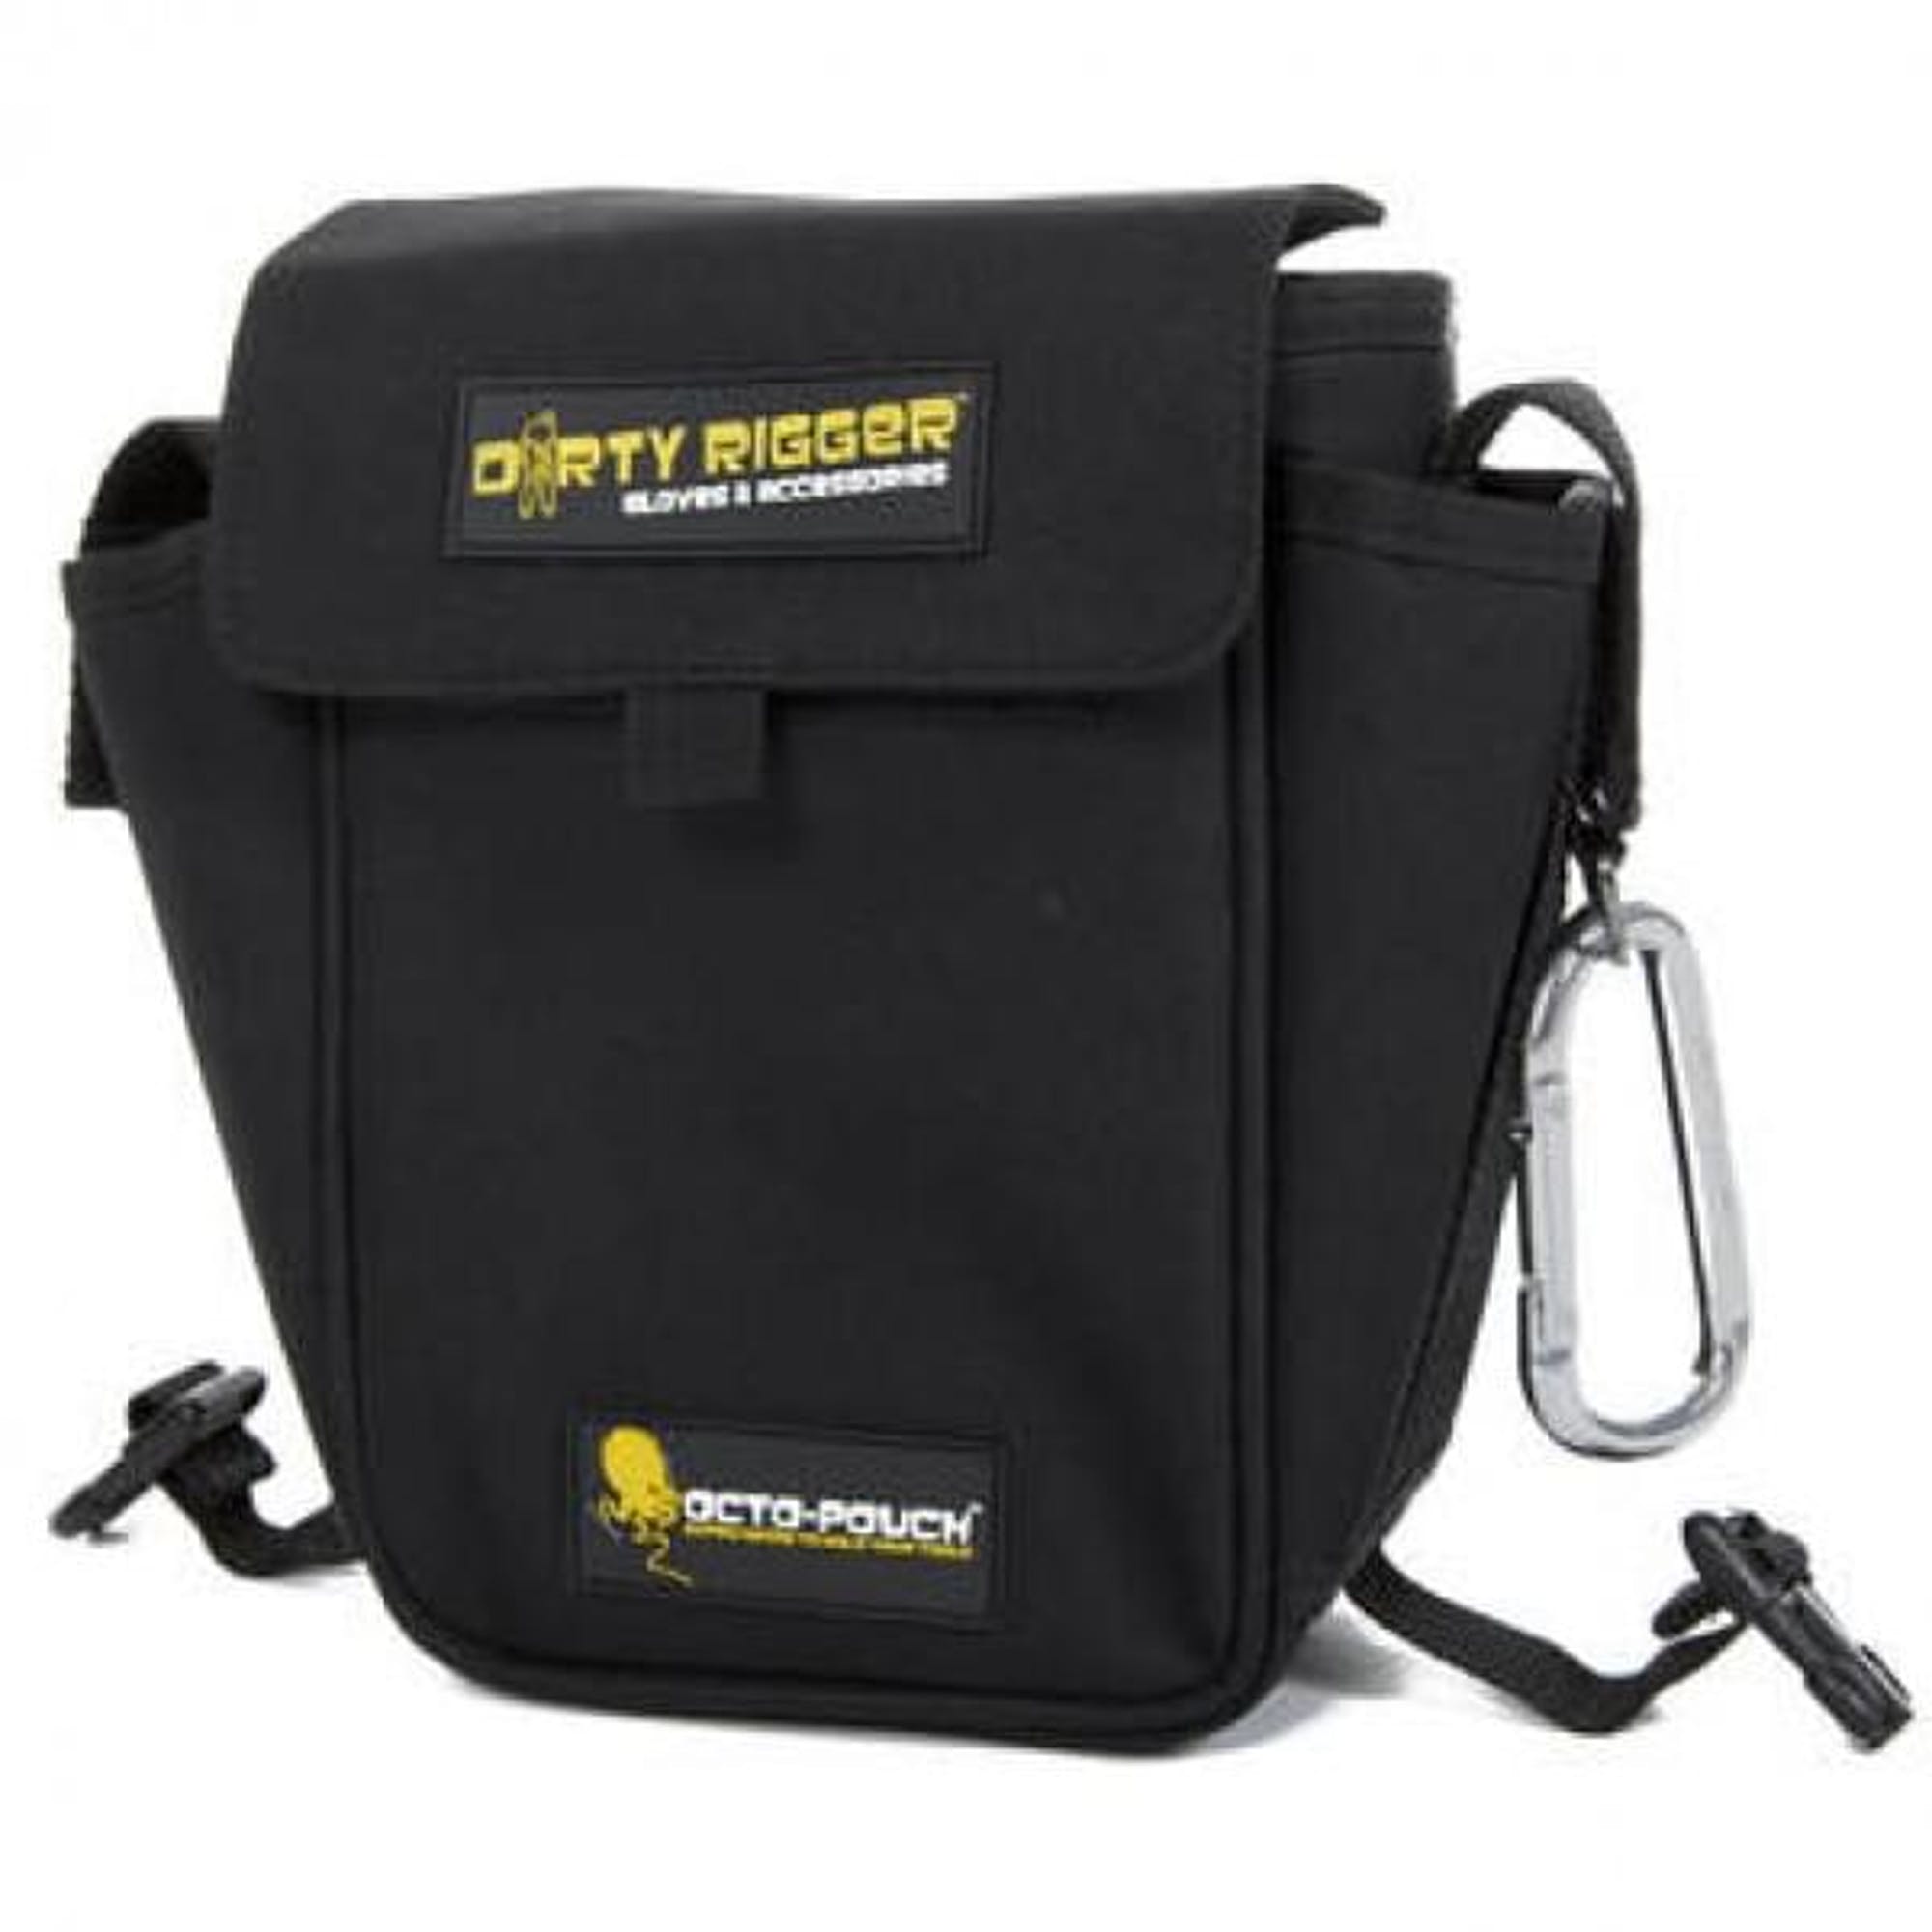 Dirty Rigger® Pro-Pocket XT launched at ABTT - Le Mark Group